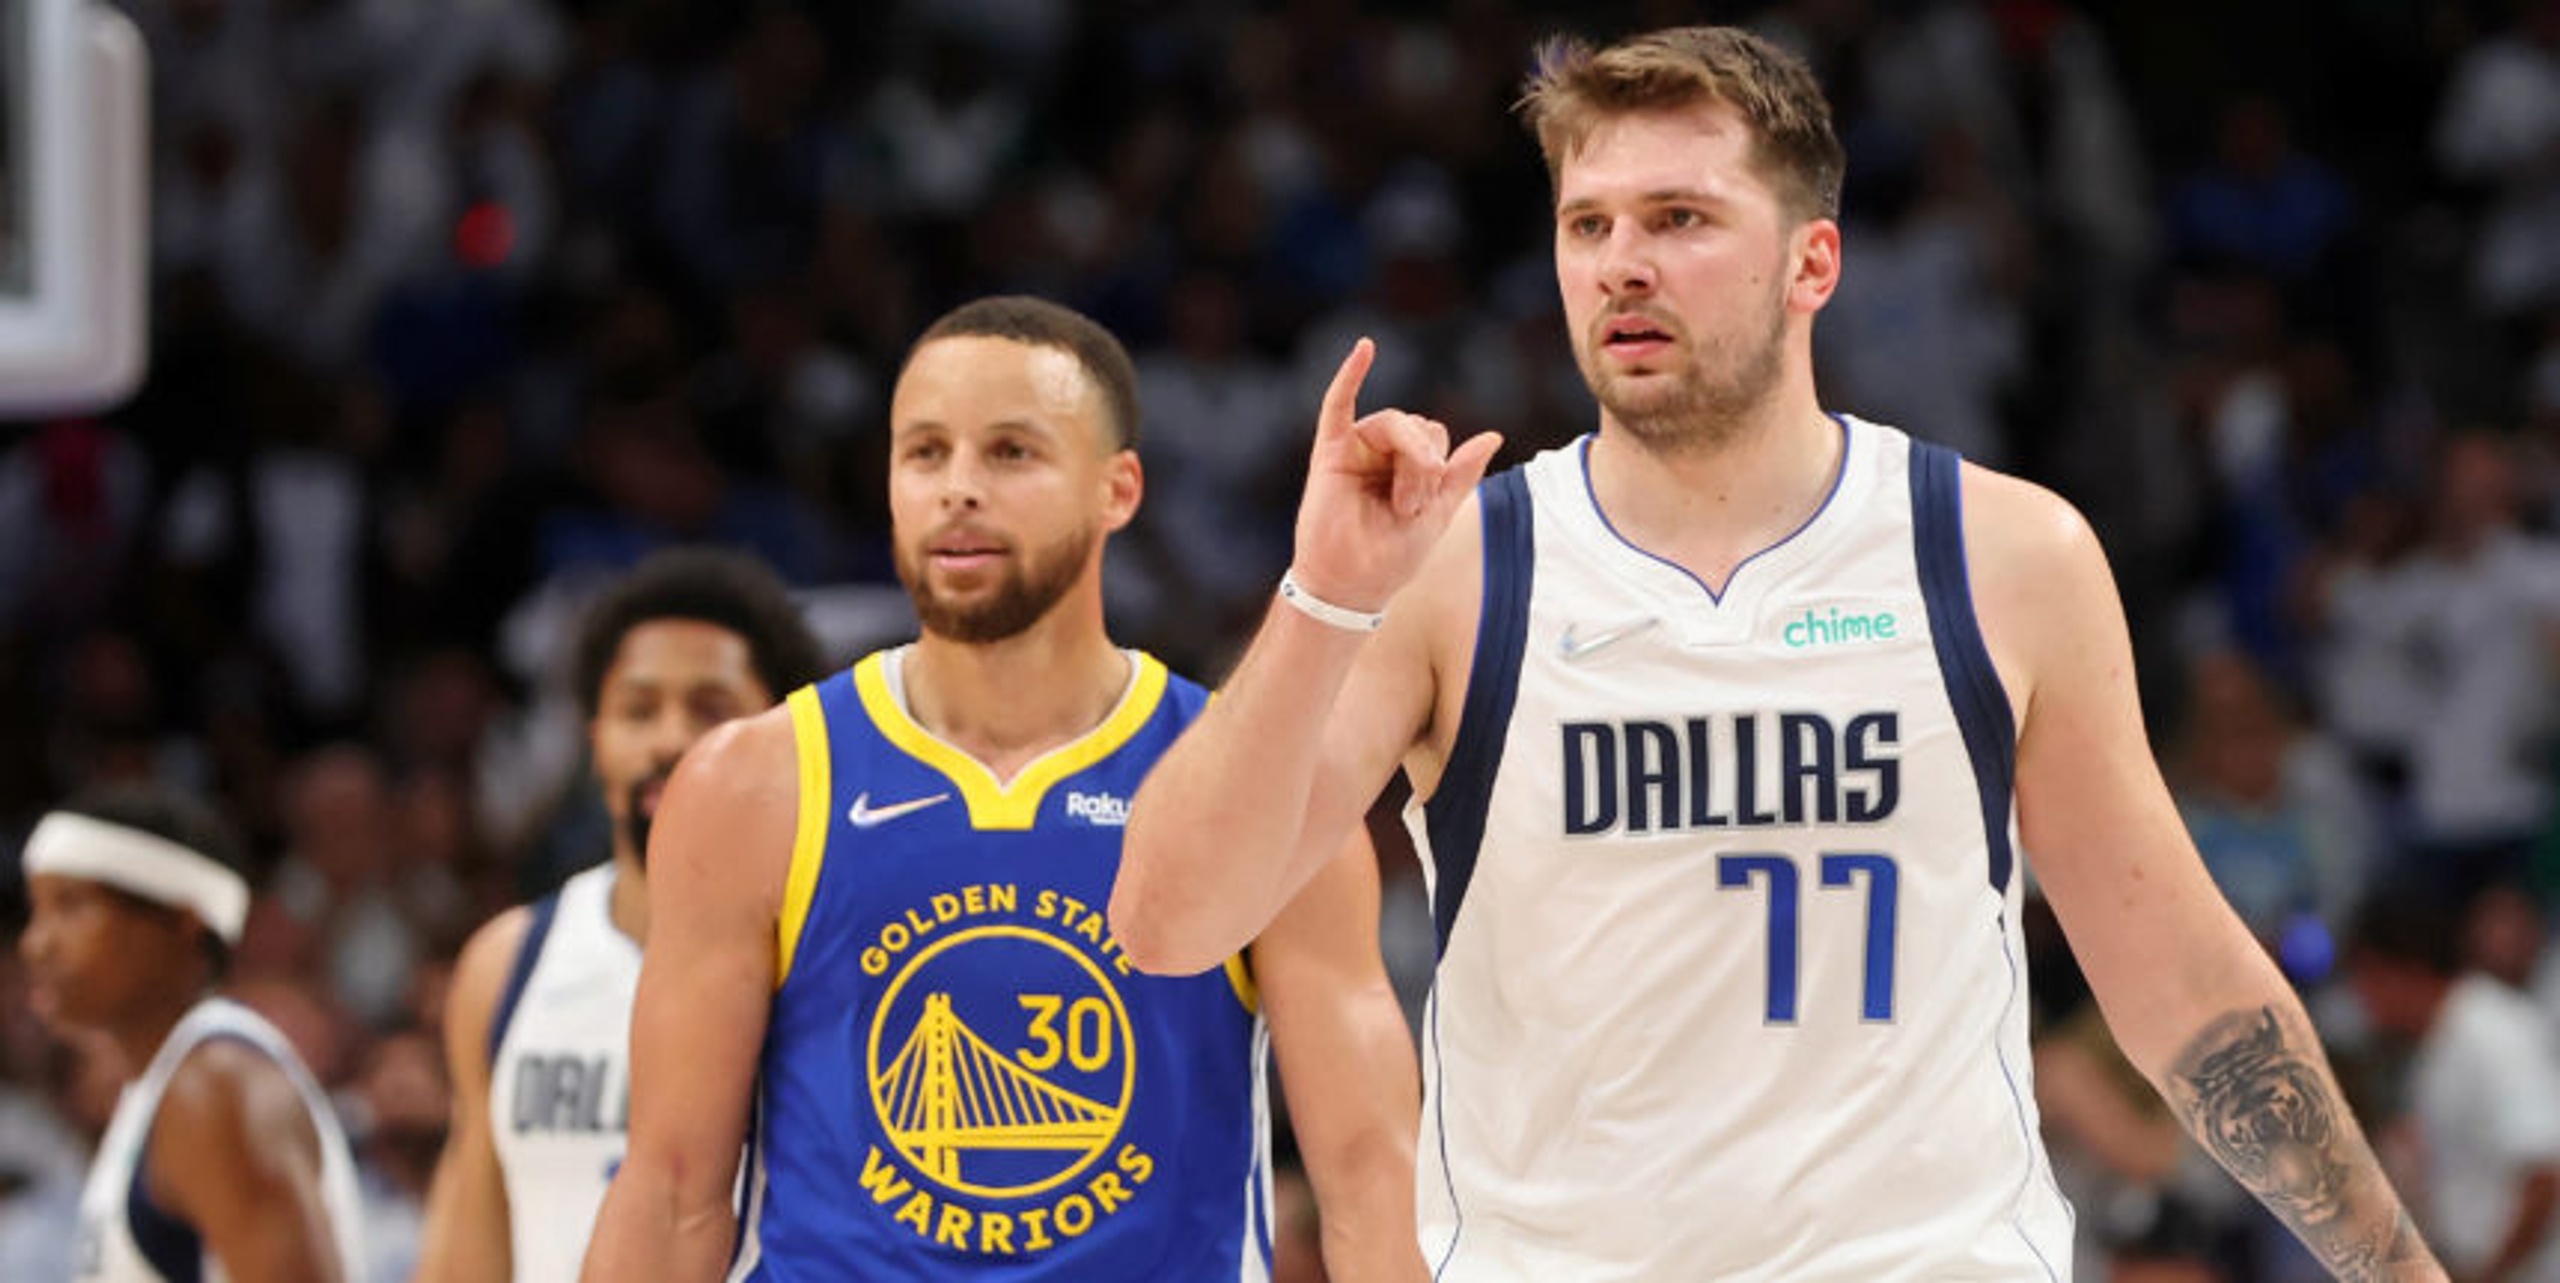 Warriors look to close out Mavs and get back to NBA Finals